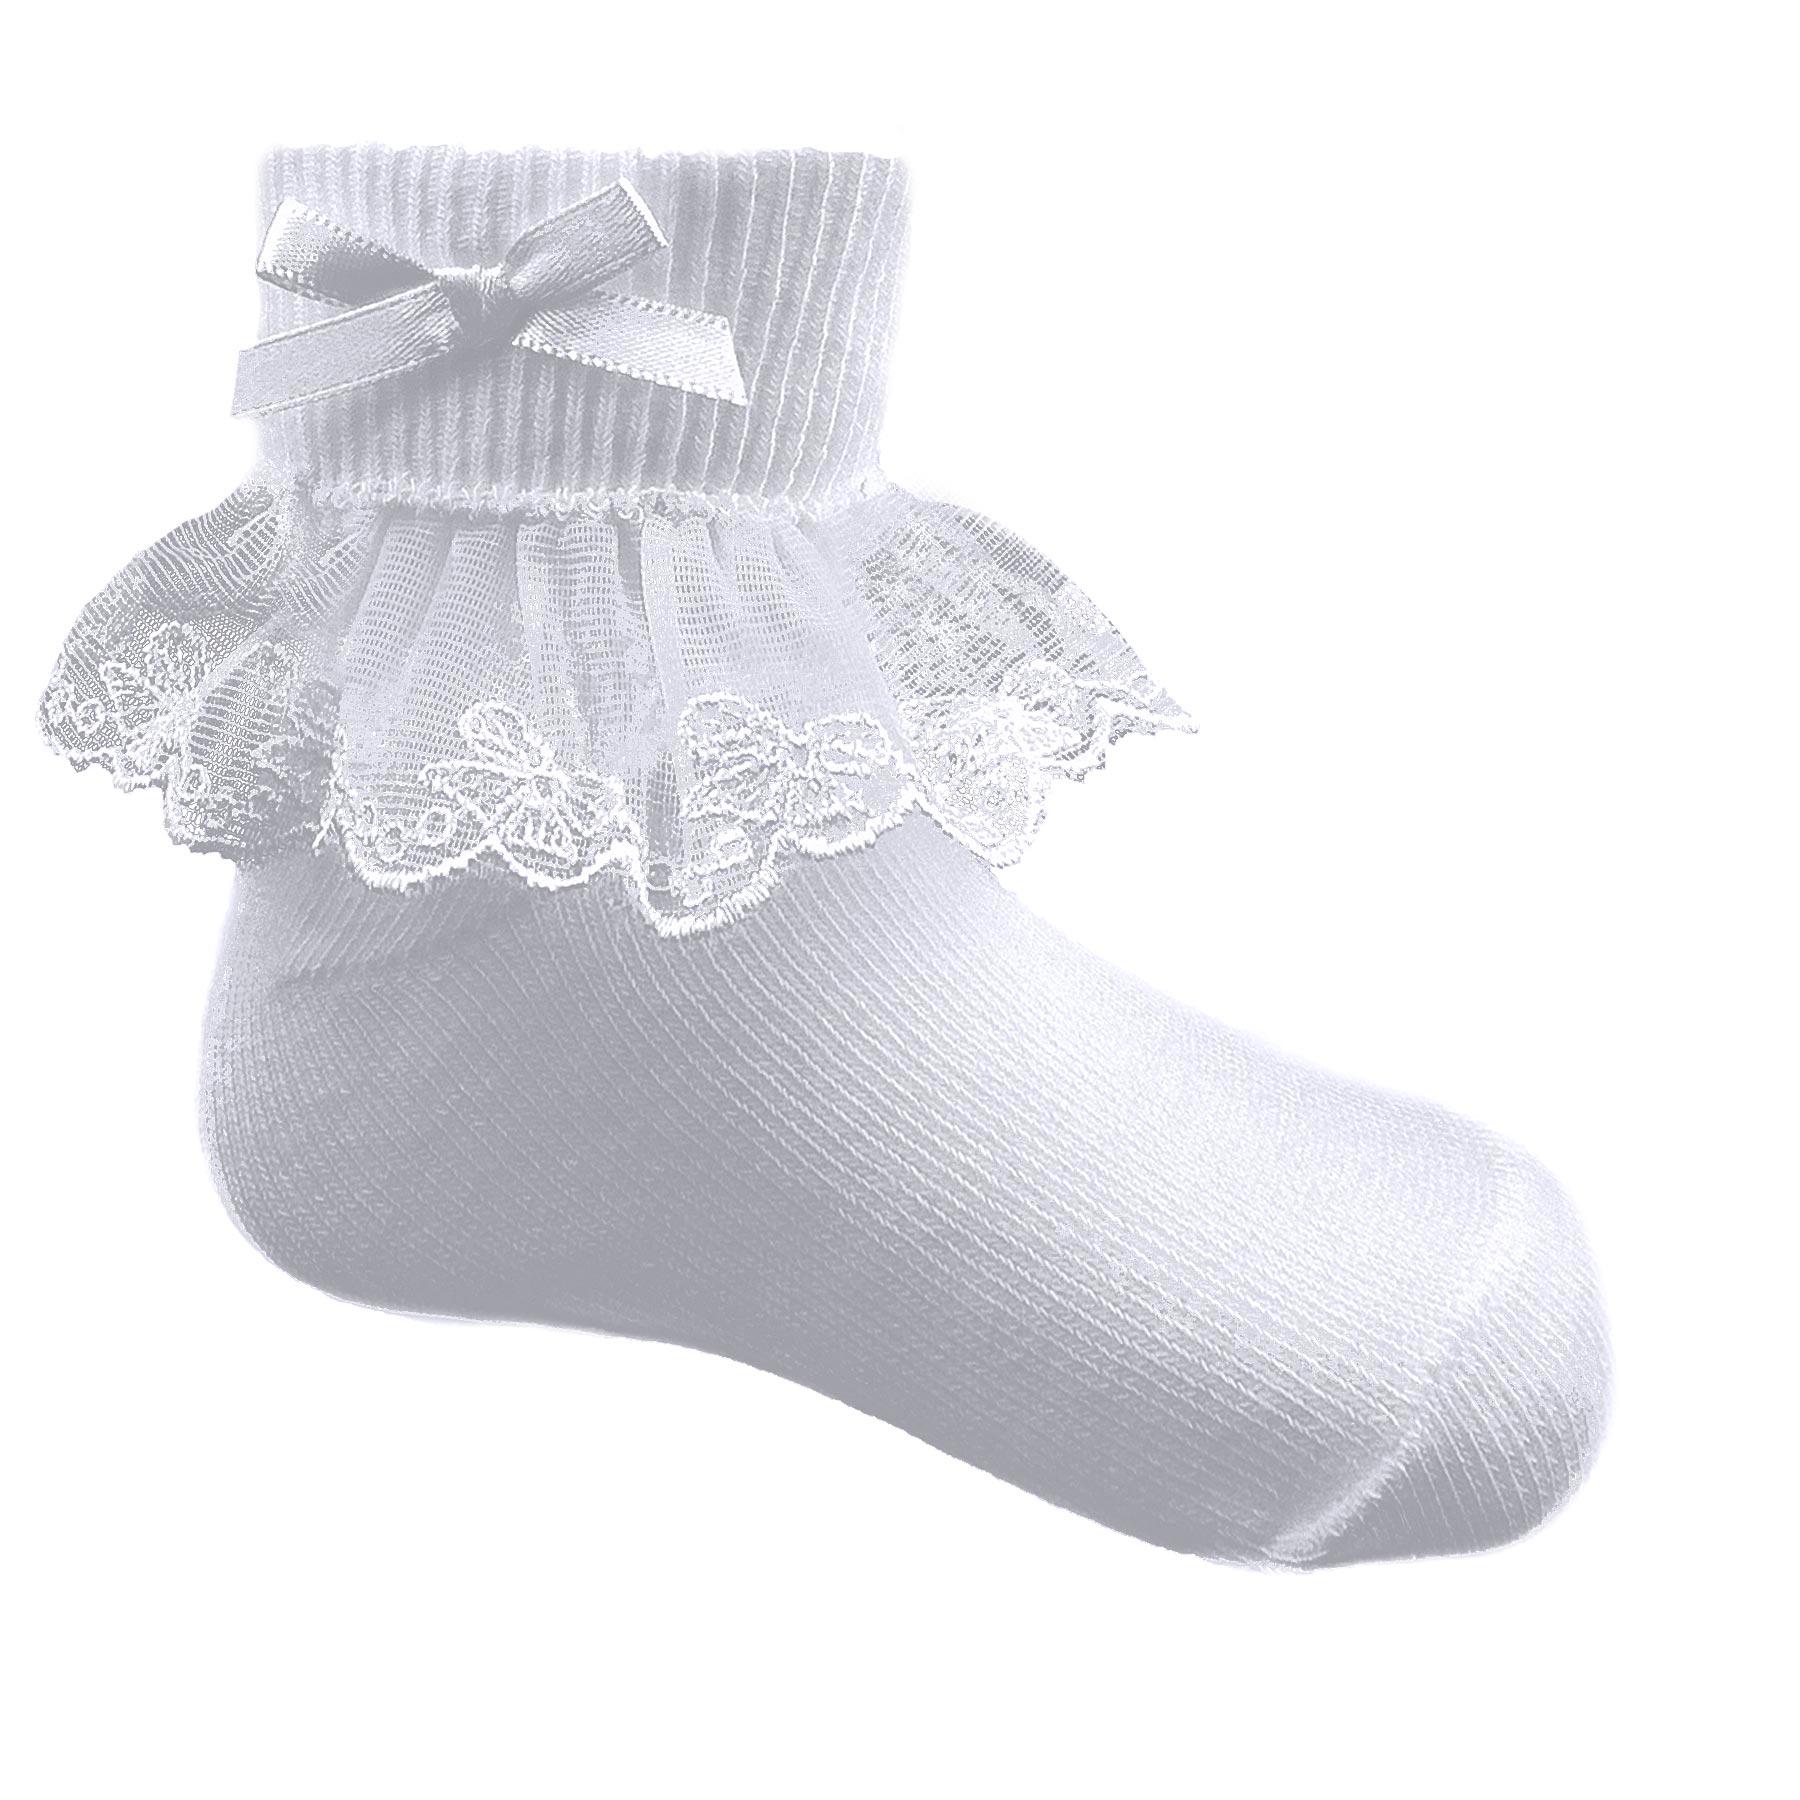 Pex Kids Lace & Bow Ankle Socks in White